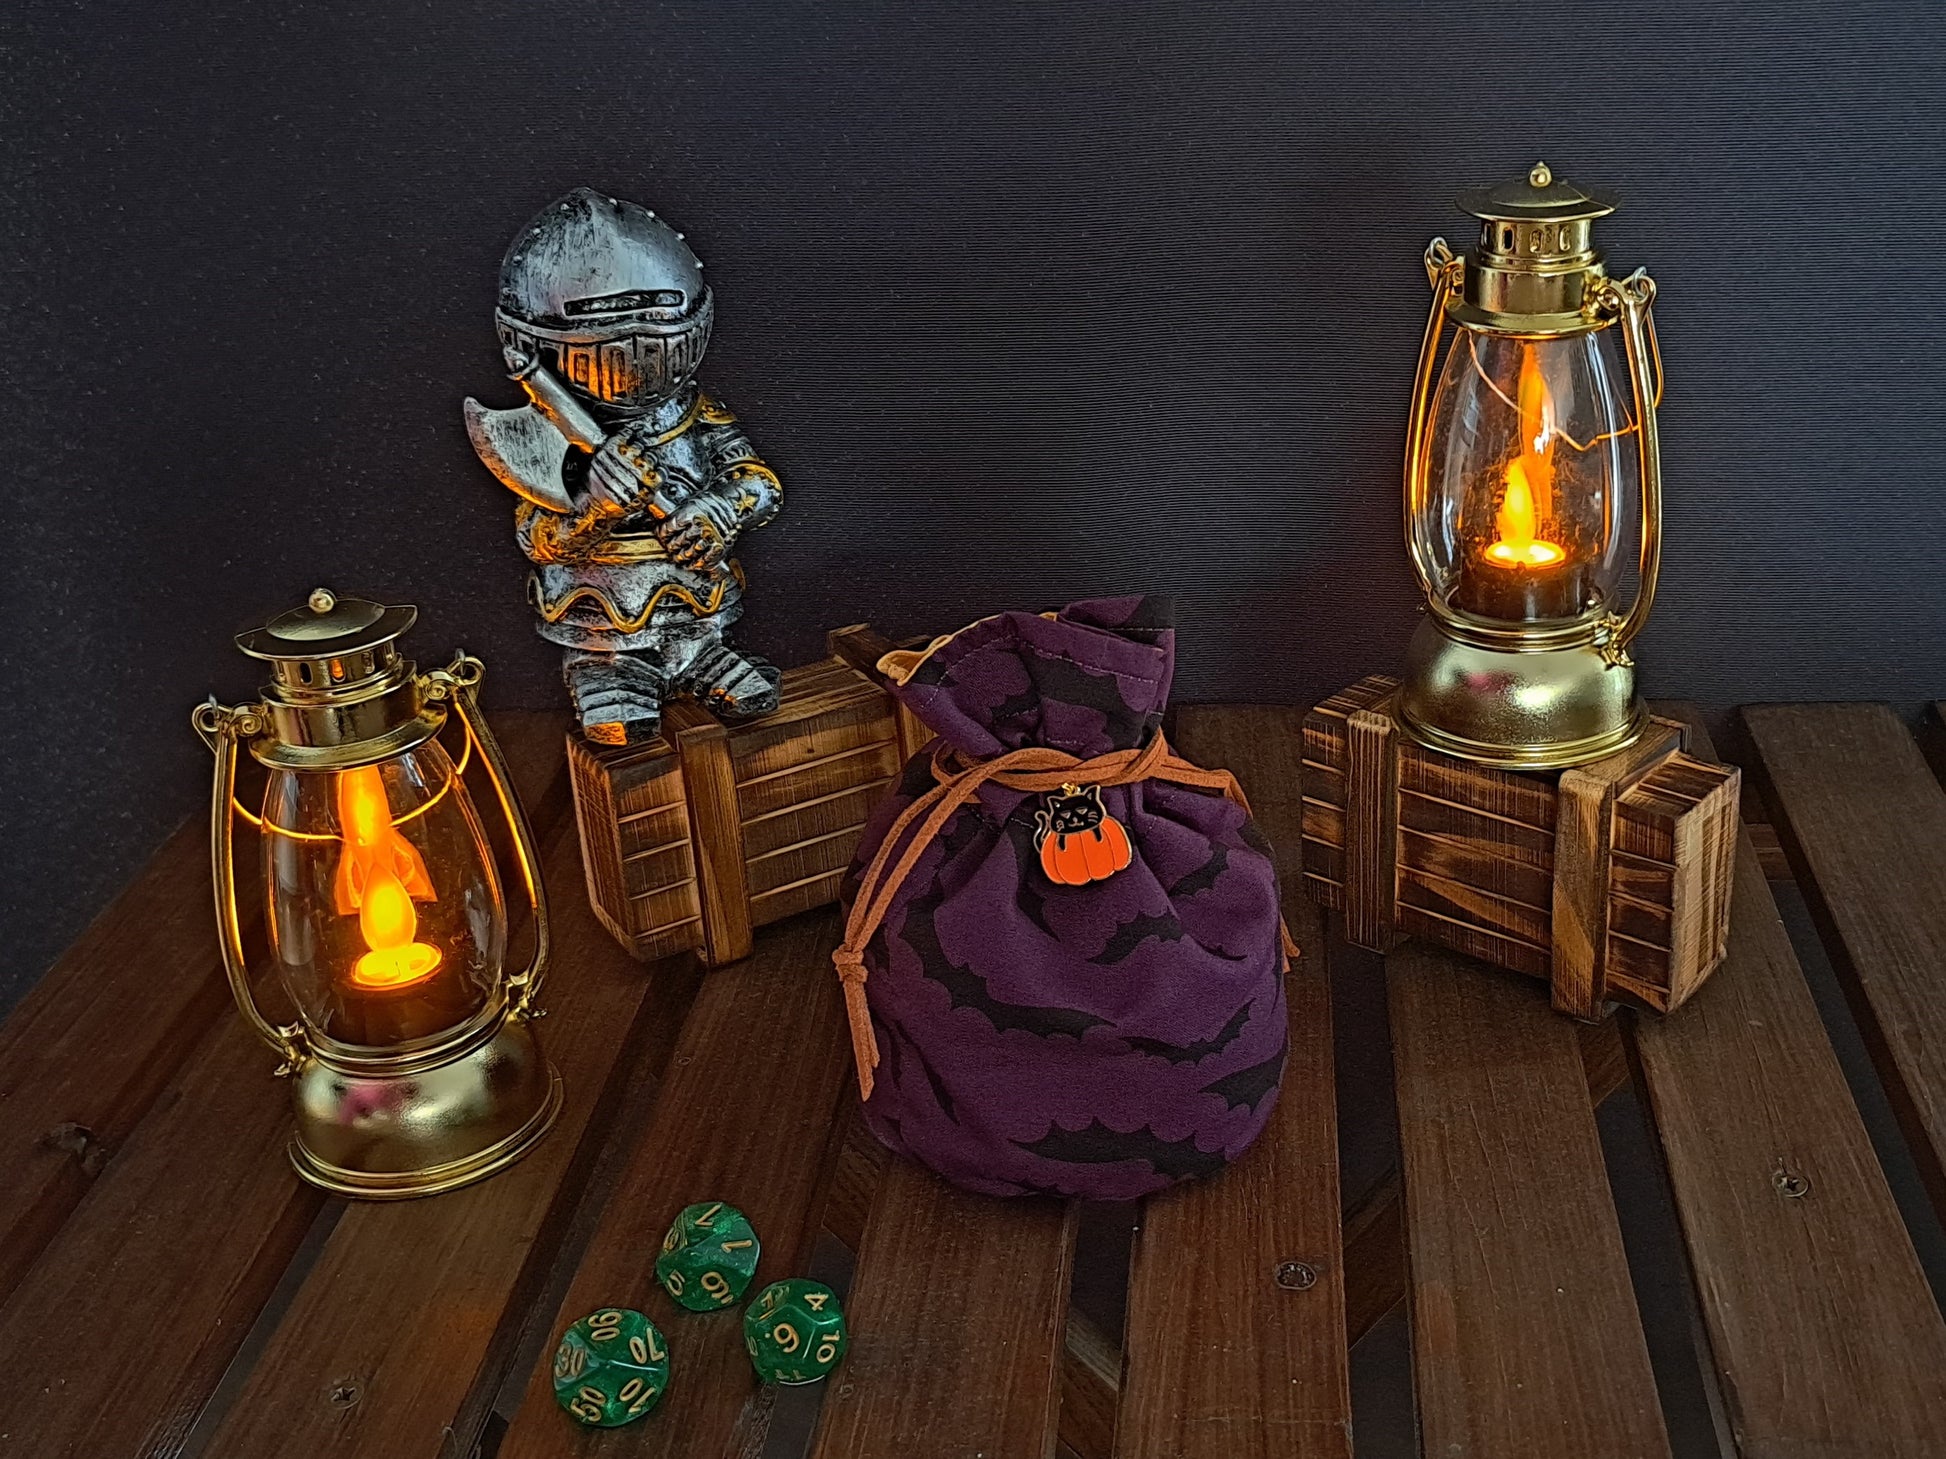 Handmade Dice bag made of purple fabric with black bats on it with a pumpkin charm